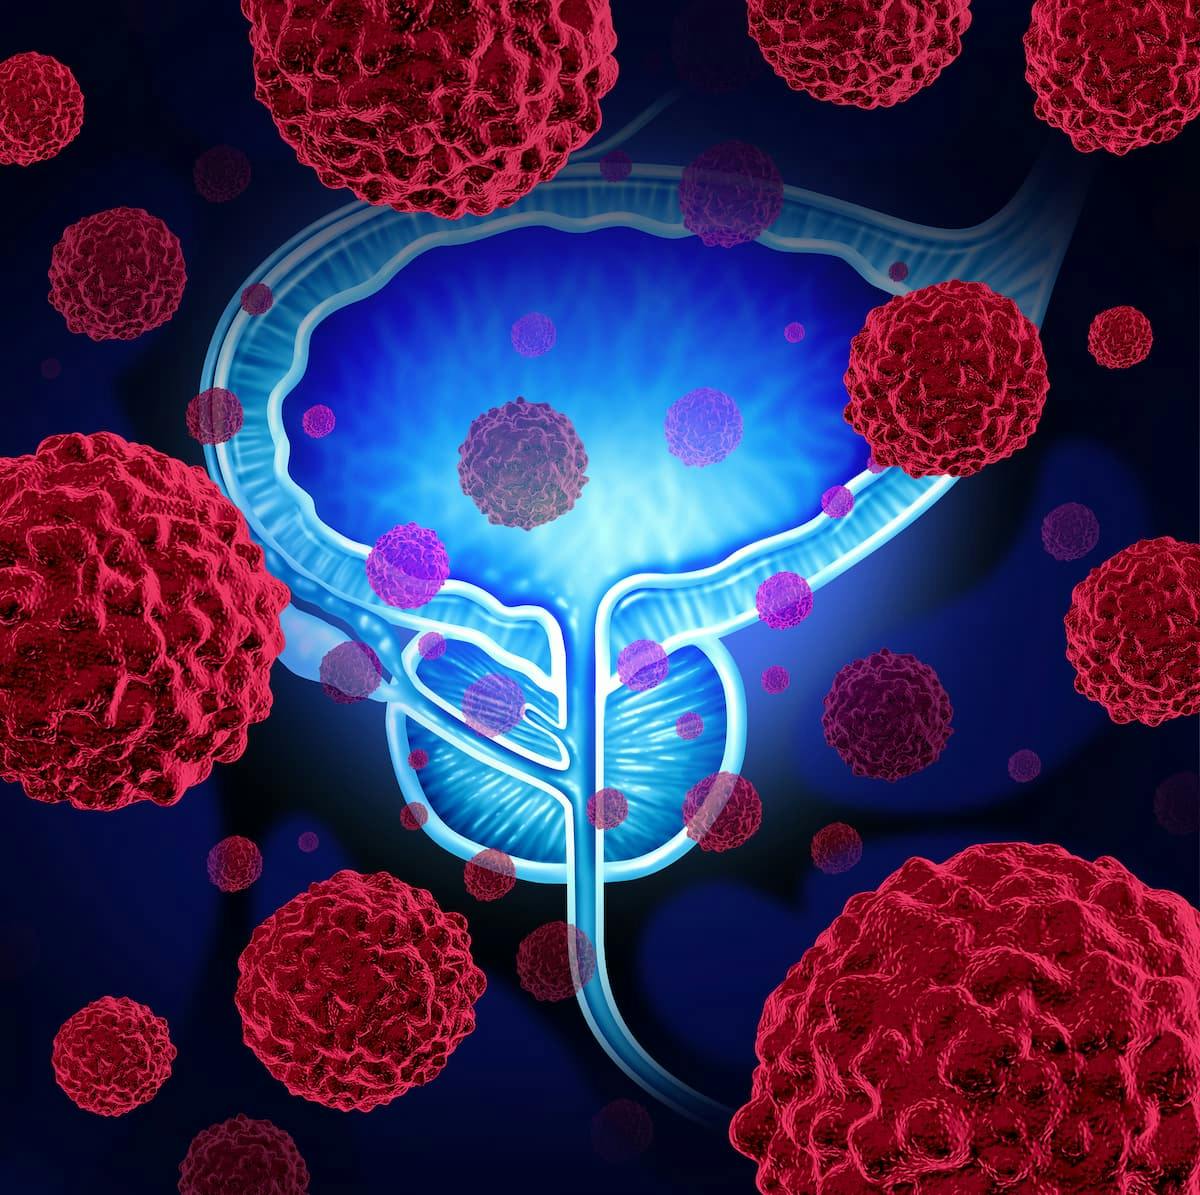 "This study shows that the combination of metastasis-directed radiation and intermittent hormone therapy significantly improved [PFS], with manageable toxicities, for patients with oligometastatic disease,” according to an expert from The University of Texas MD Anderson Cancer Center.